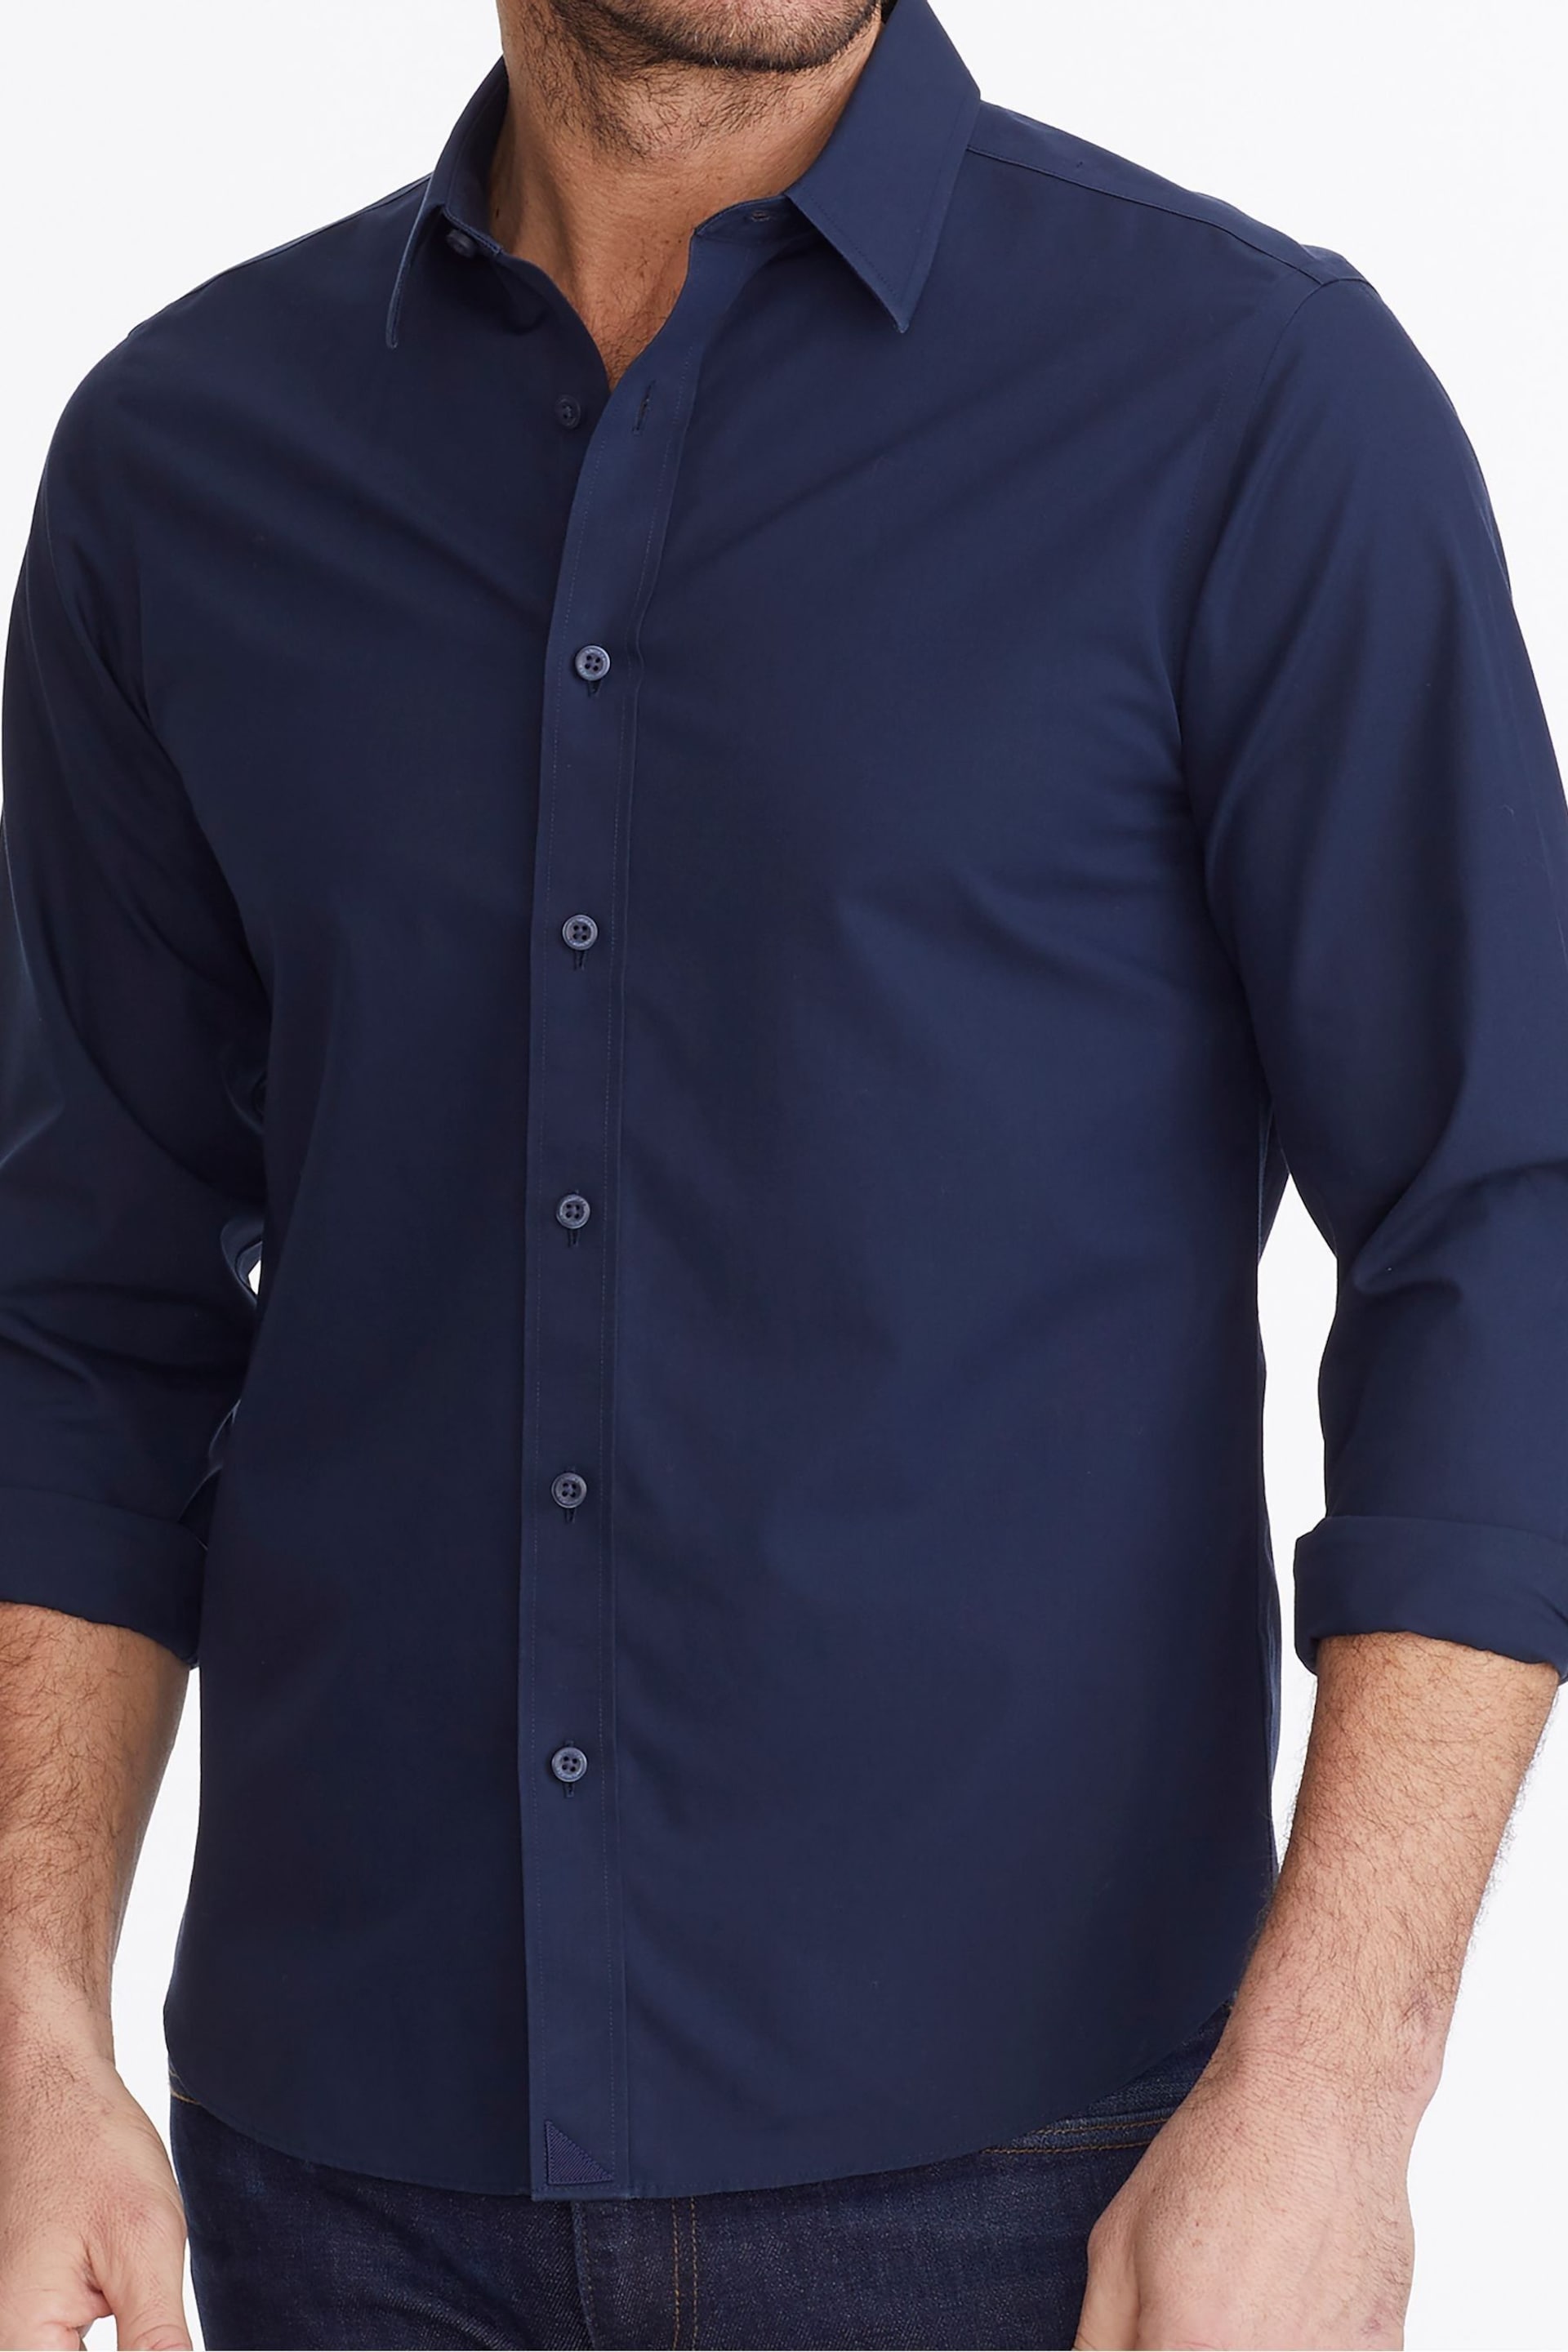 UNTUCKit Dark Blue Wrinkle-Free Relaxed Fit Castello Shirt - Image 6 of 6